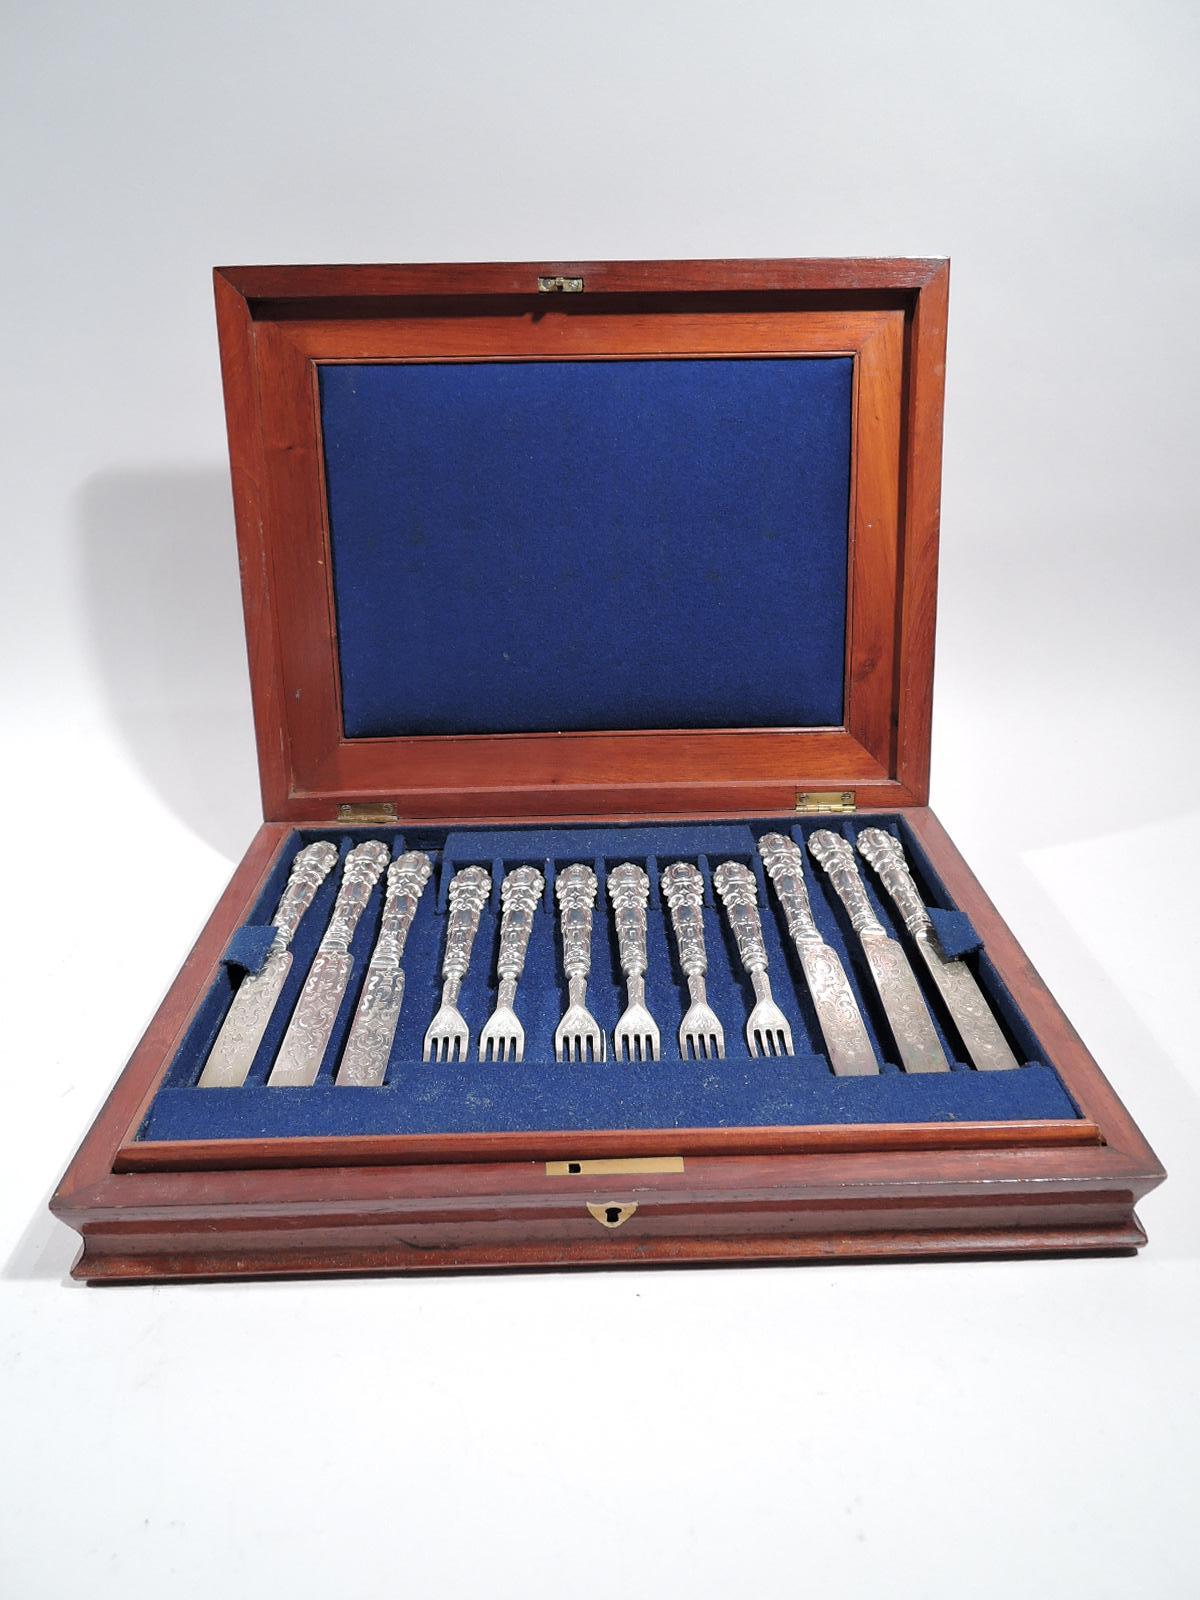 Victorian sterling silver fruit set. Made by Henry Wilkinson & Co. in Sheffield in 1854. This set comprises 12 knives and 12 forks. Strapwork handle and scrolled terminal engraved with monogram. Blades and shanks engraved with same. Ramped up